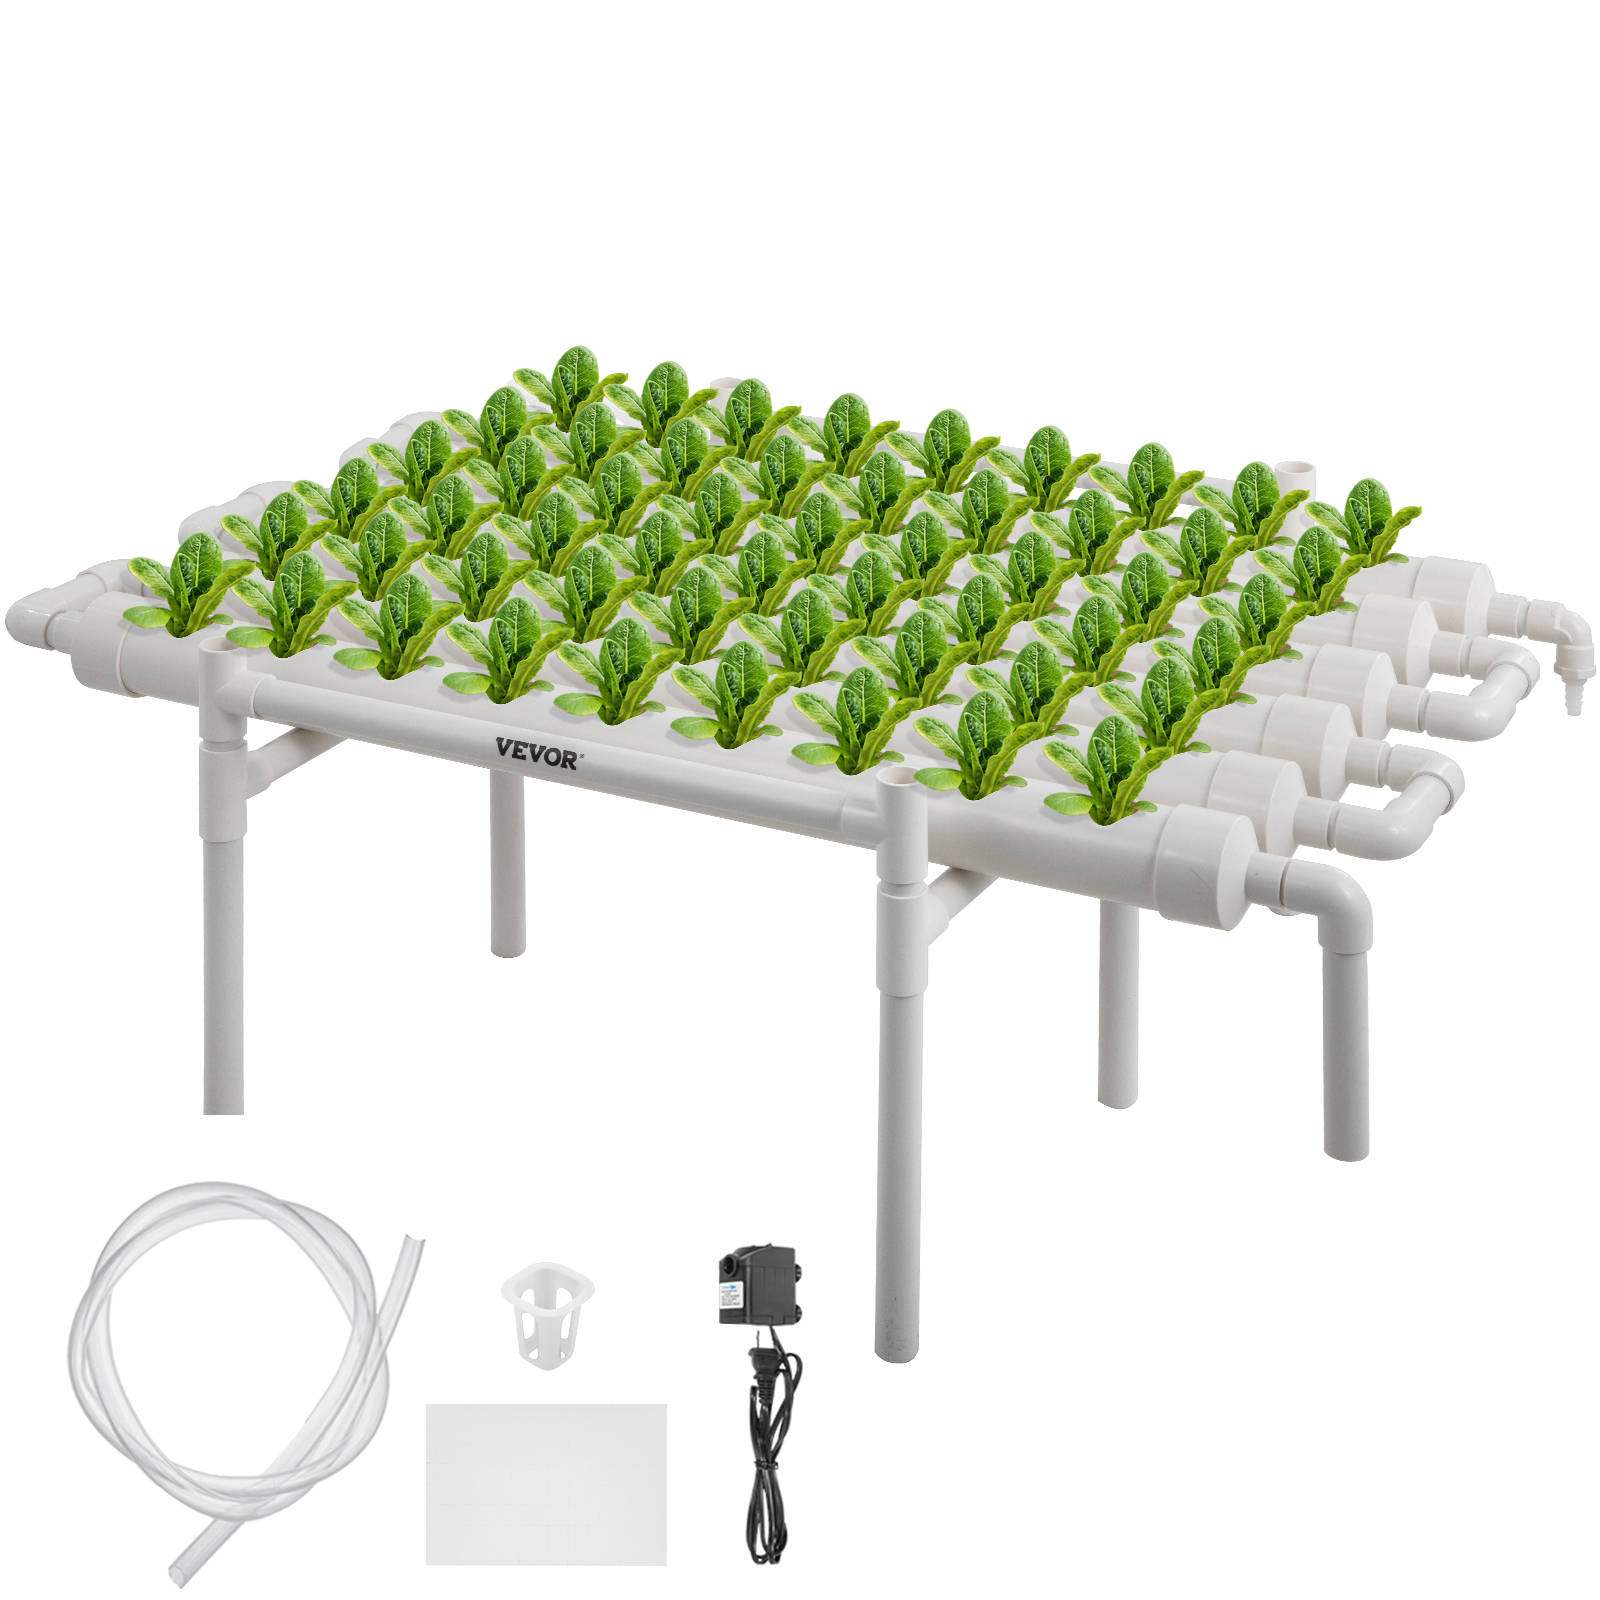 6 Pipes 1 Layer 54 Plant Sites Hydroponic Grow Kit Celery System Melons Planting от Vevor Many GEOs